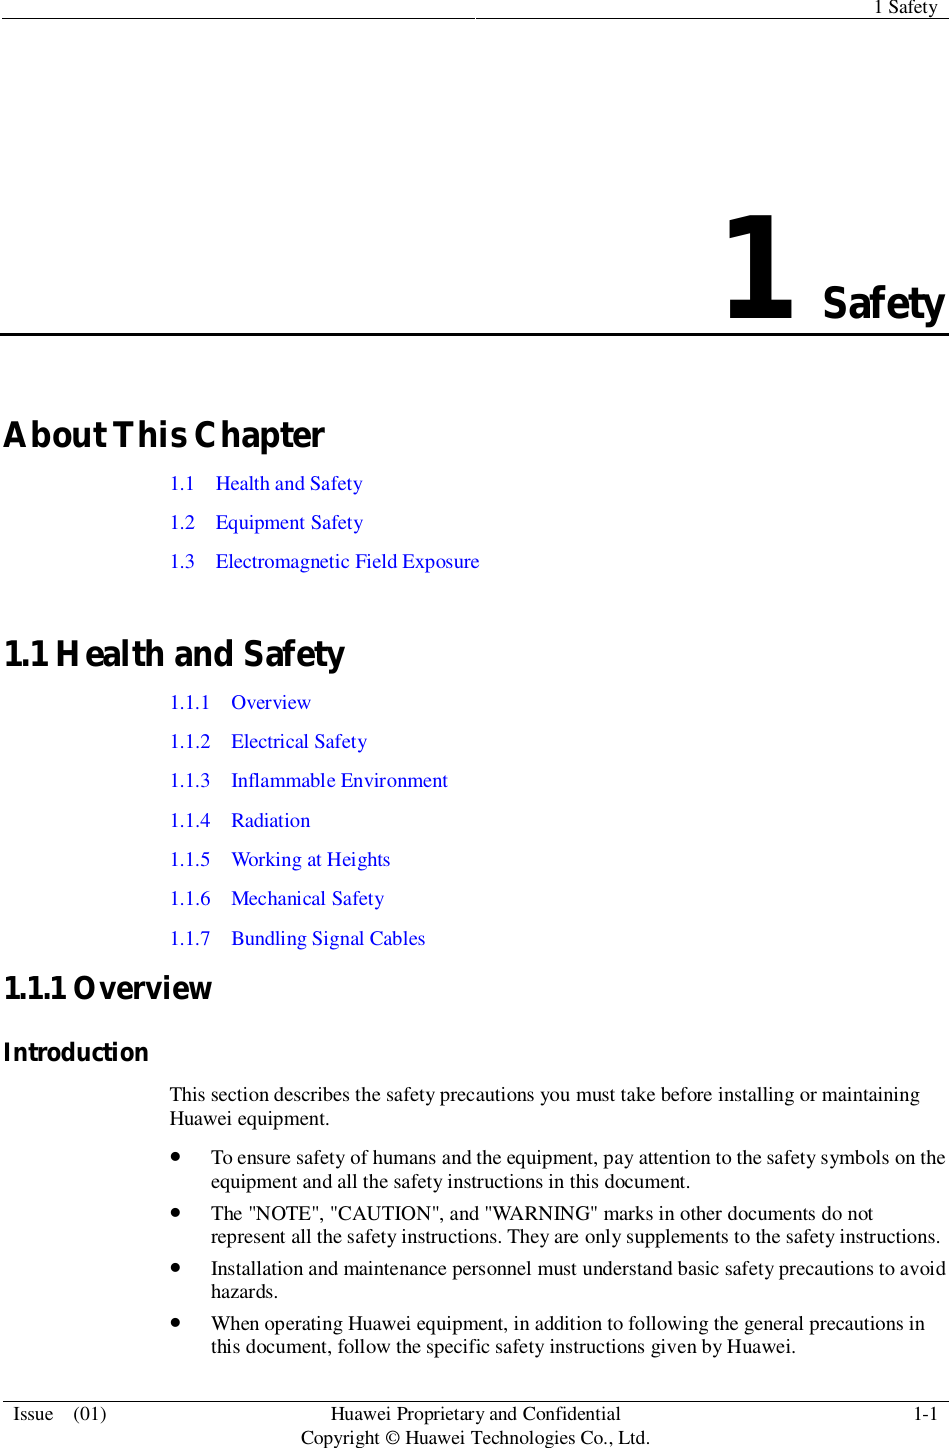 1 SafetyIssue  (01) HuaweiProprietary and ConfidentialCopyright © Huawei Technologies Co., Ltd. 1-11SafetyAbout This Chapter1.1   Health and Safety1.2  Equipment Safety1.3   Electromagnetic Field Exposure1.1 Health and Safety1.1.1  Overview1.1.2   Electrical Safety1.1.3   Inflammable Environment1.1.4  Radiation1.1.5   Working at Heights1.1.6  Mechanical Safety1.1.7   Bundling Signal Cables1.1.1 OverviewIntroductionThis section describes the safety precautions you must take before installing or maintainingHuawei equipment.To ensure safety of humans and the equipment, pay attention to the safety symbols on theequipment and all the safety instructions in this document.The &quot;NOTE&quot;, &quot;CAUTION&quot;, and &quot;WARNING&quot; marks in other documents do notrepresent all the safety instructions. They are only supplements to the safety instructions.Installation and maintenance personnel must understand basic safety precautions to avoidhazards.When operating Huawei equipment, in addition to following the general precautions inthis document, follow the specific safety instructions given by Huawei.